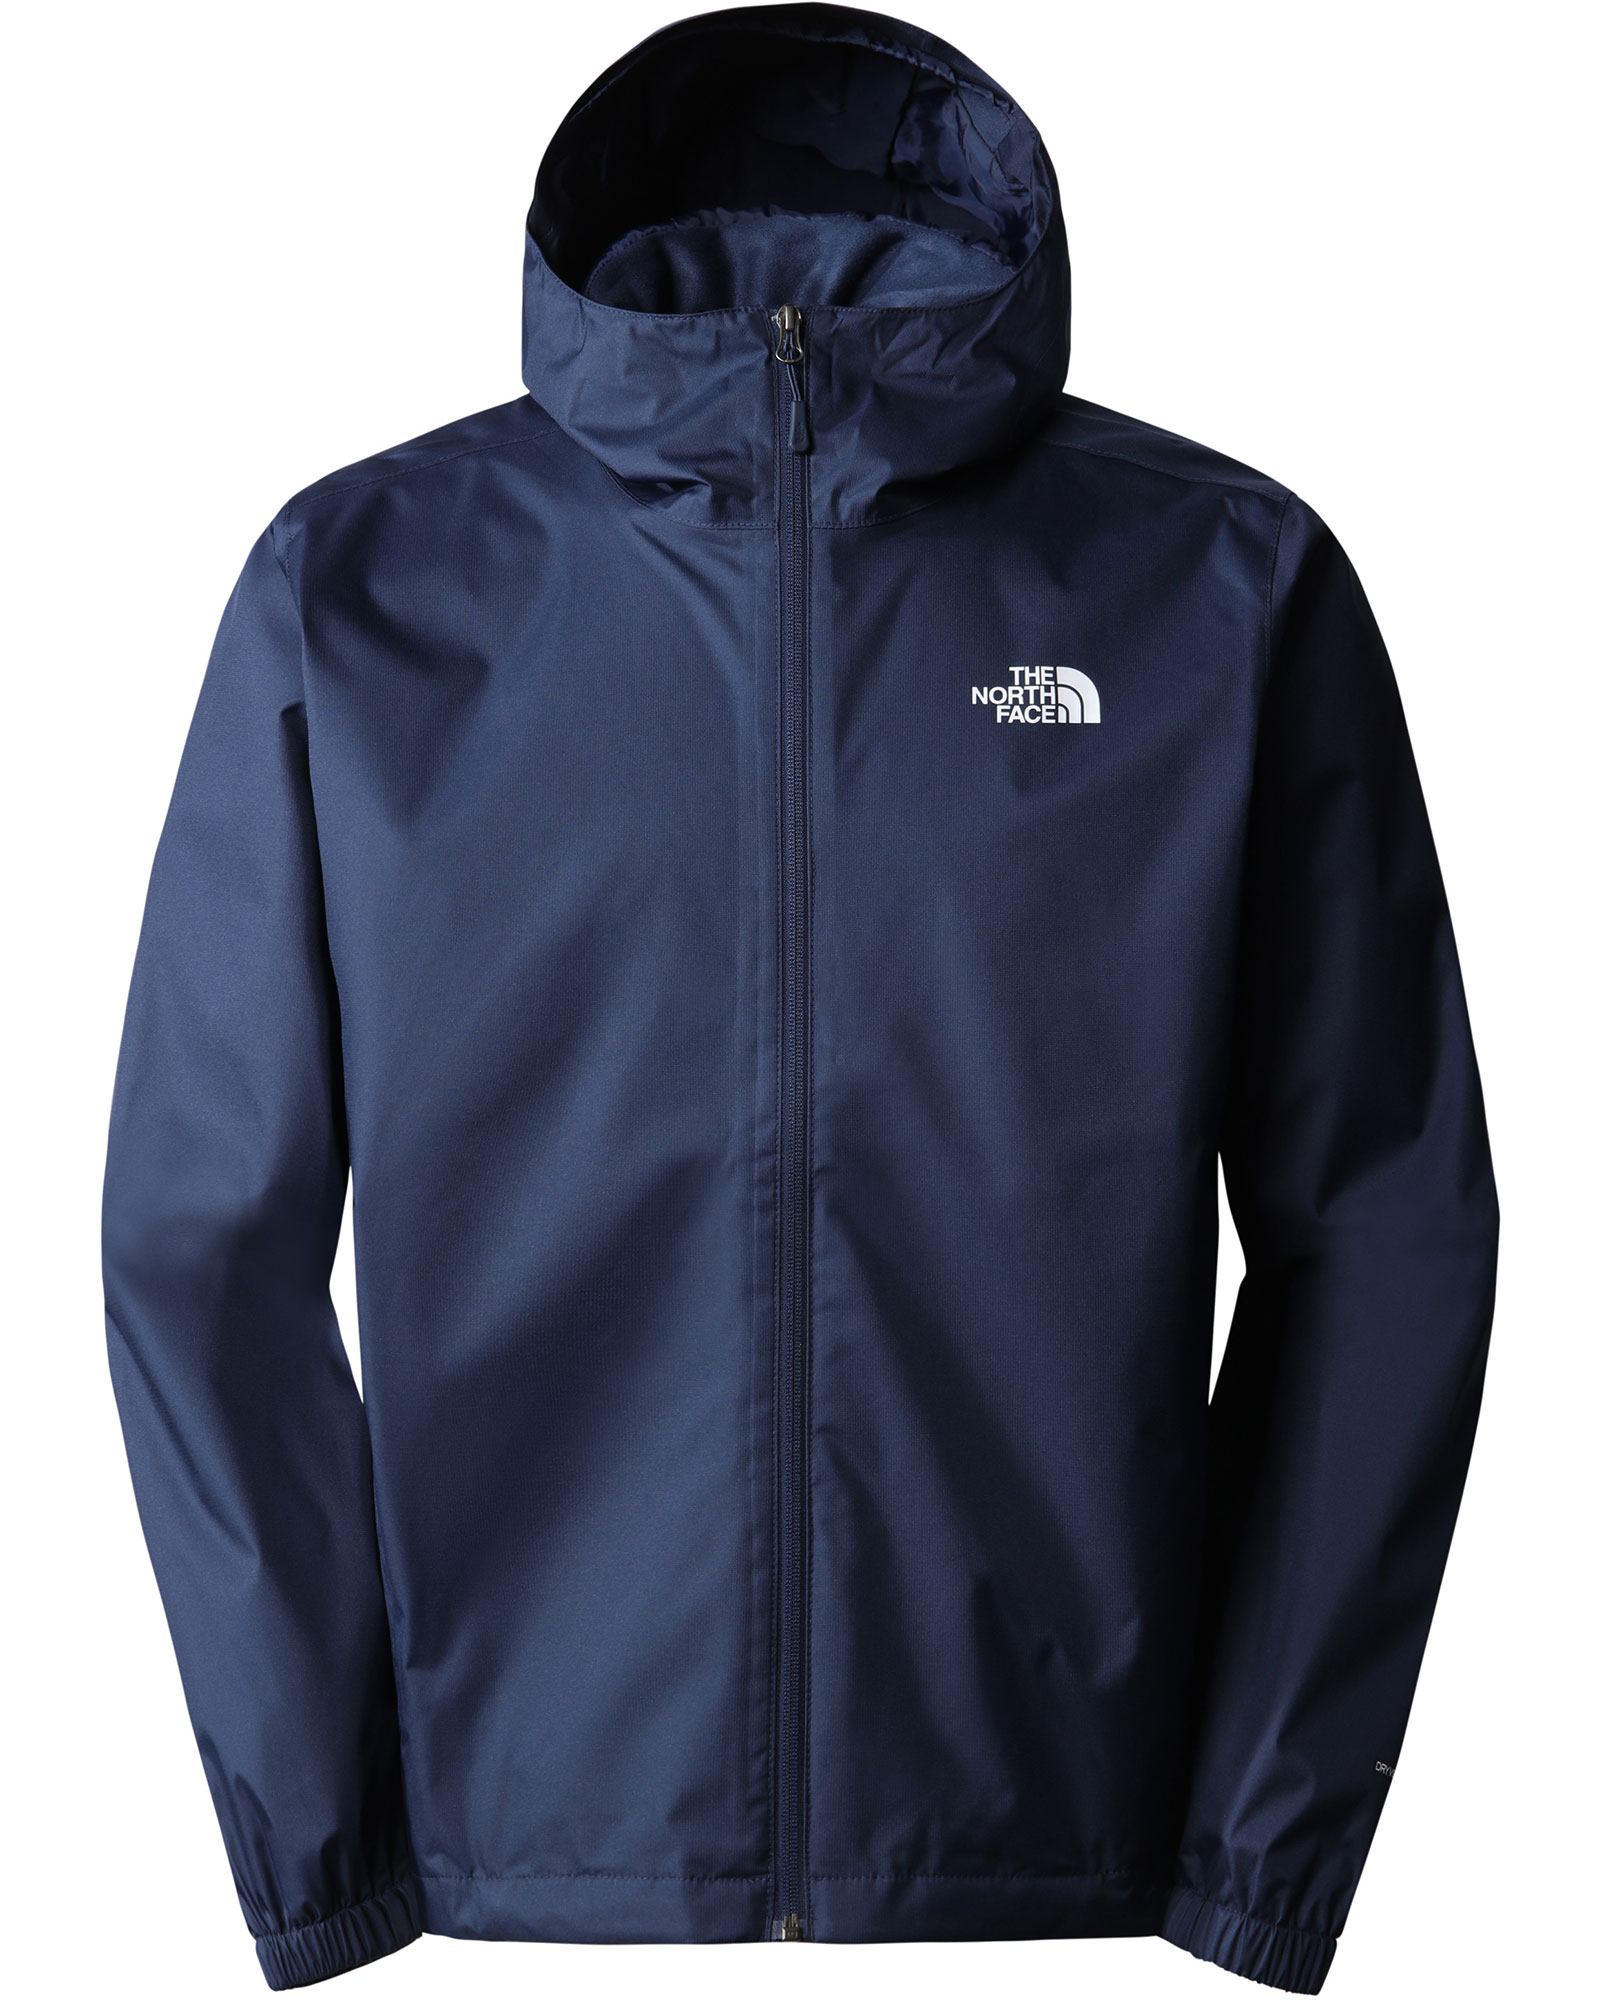 The North Face Quest DryVent Men’s Jacket - Summit Navy S